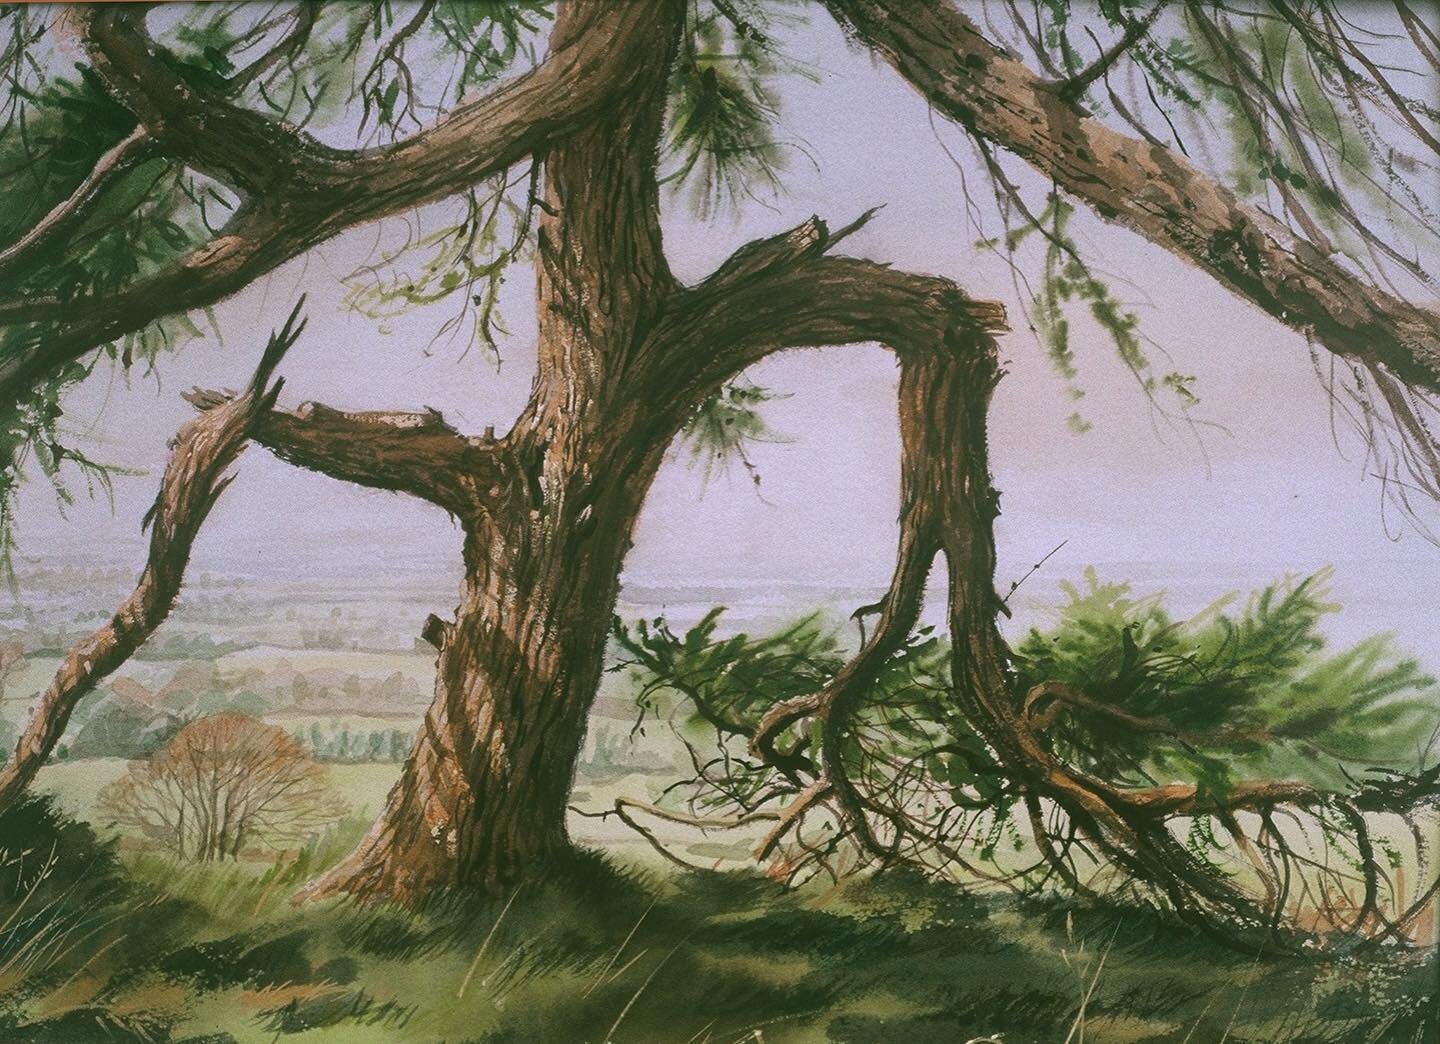 1997
Larch Tree
Watercolor 28x38 cm

Pre-empting #spring #watercolour 
#painting #trees #larch #stormdamage #newgrowth